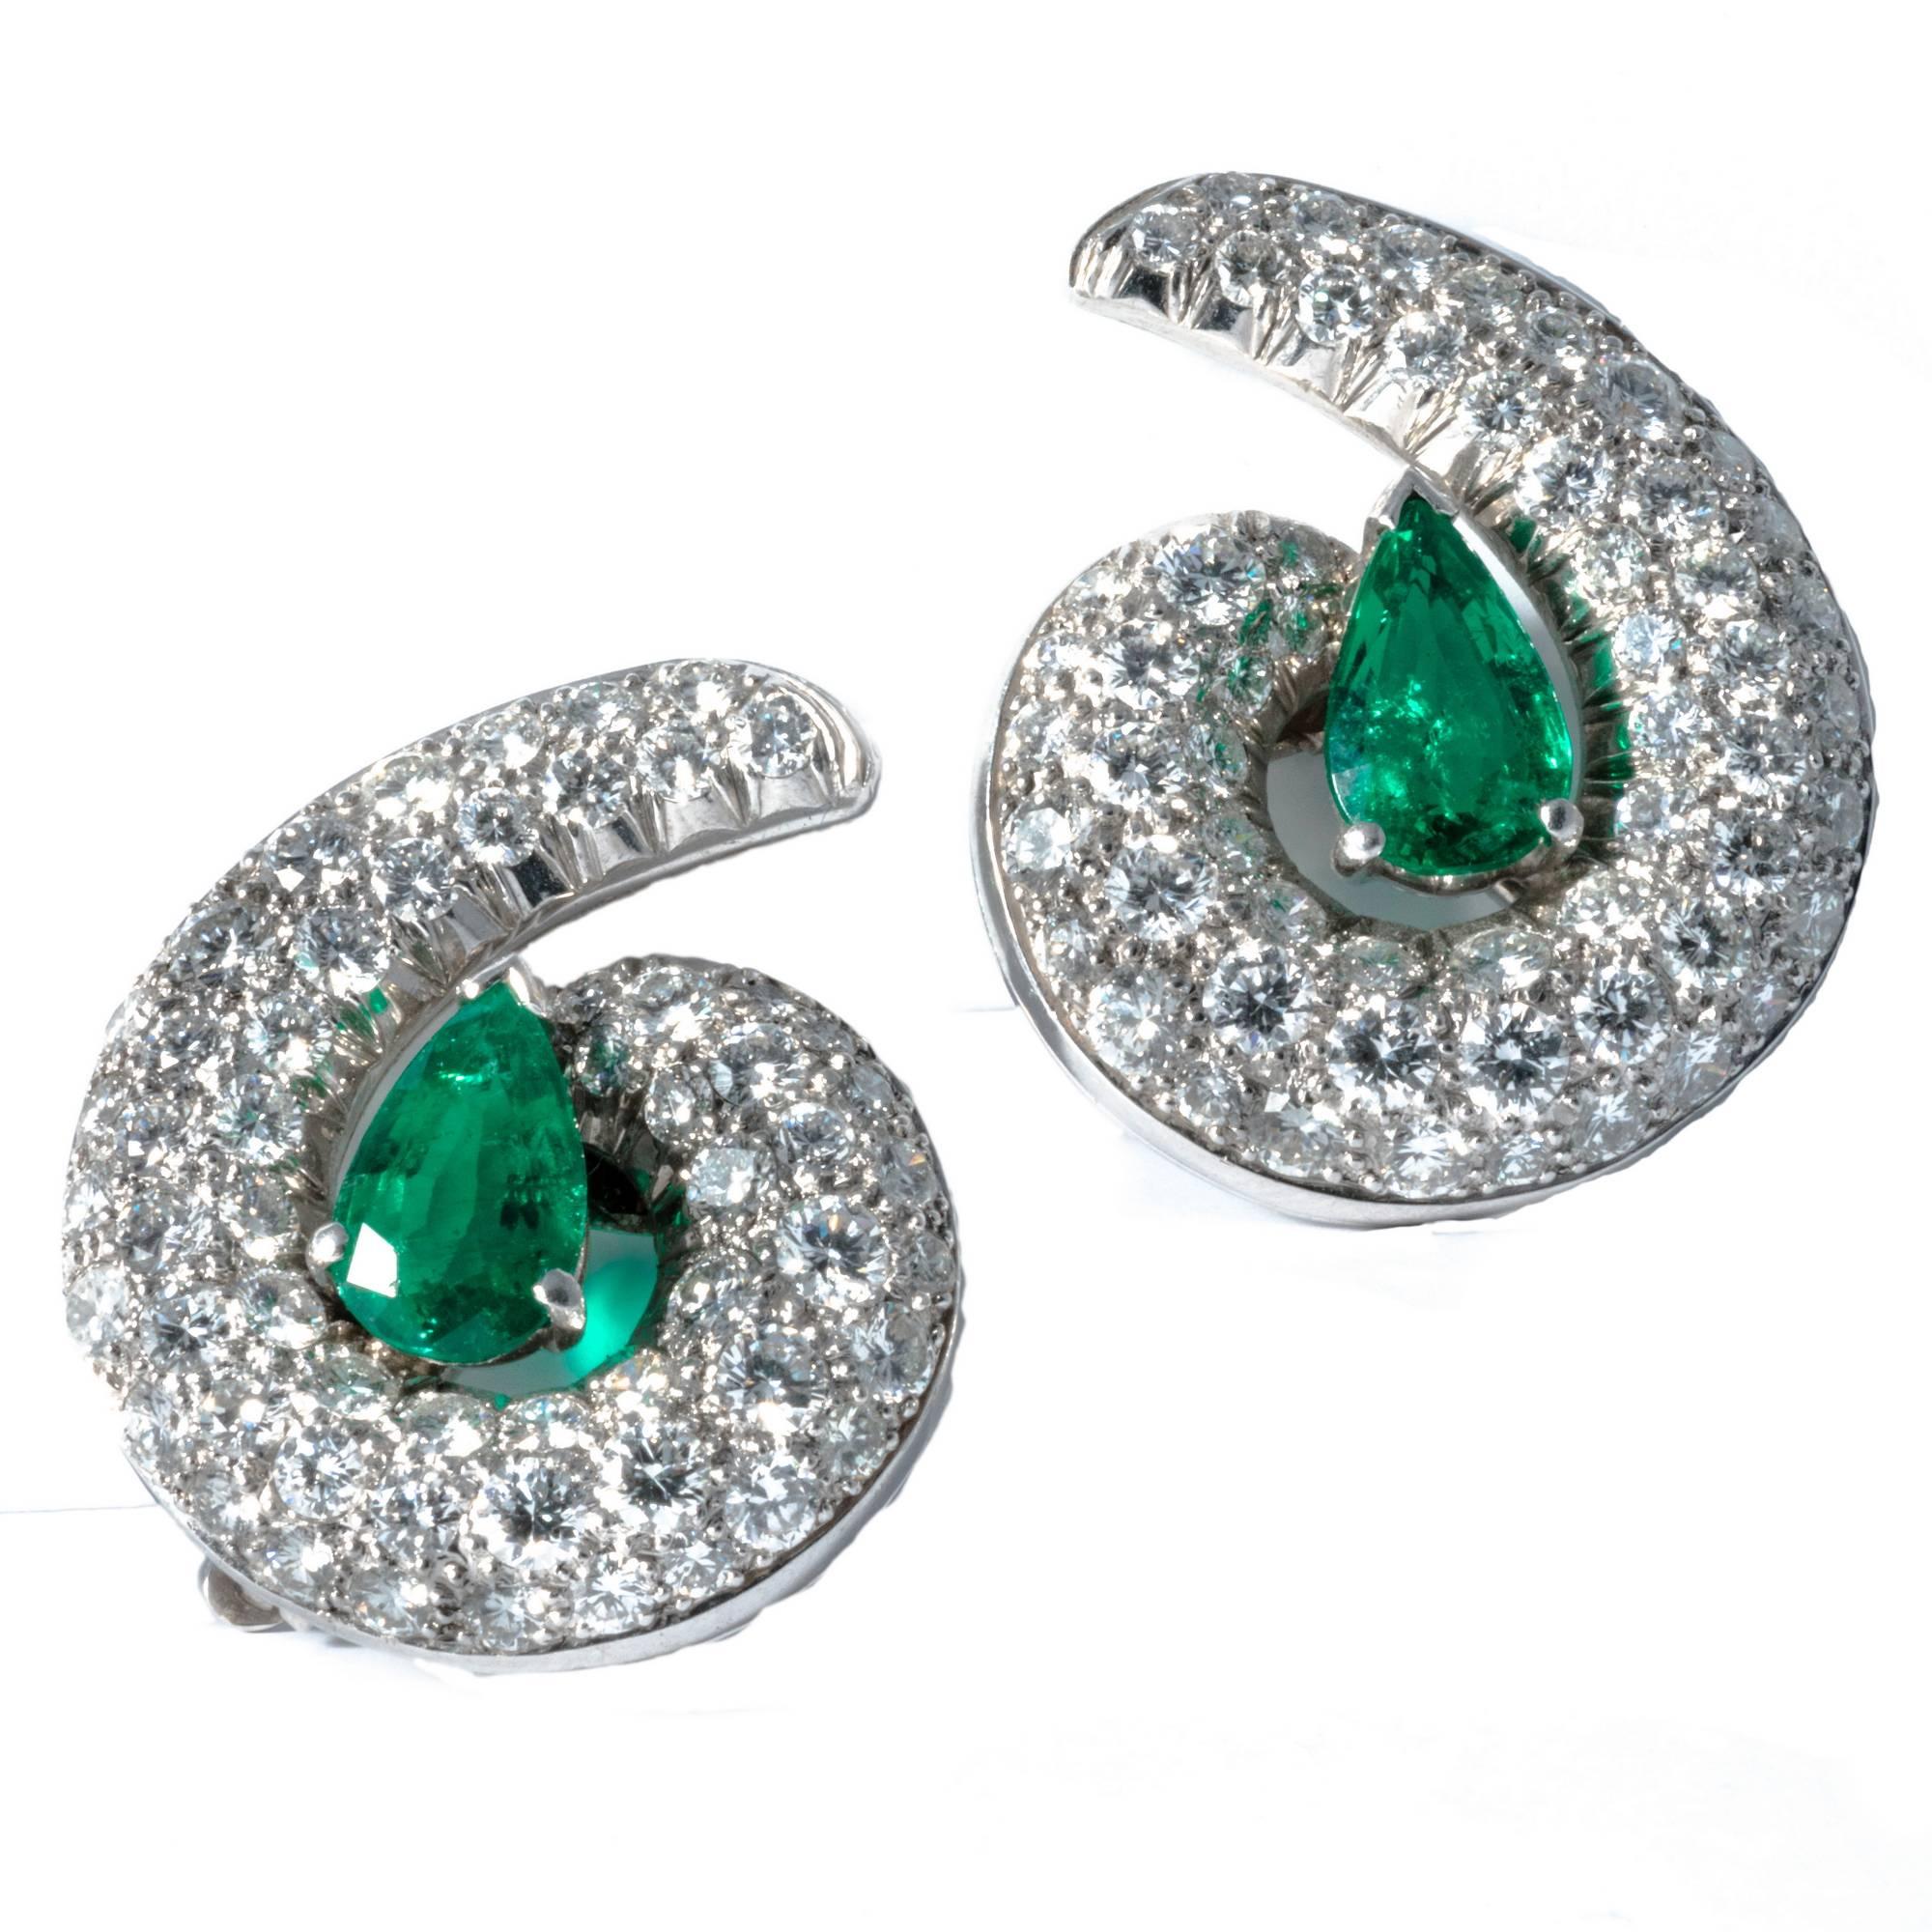 Swirly and bold, these diamond earrings were created in the 1990's in white gold and feature 2 intense vivid green emeralds (approximately carats 1.80) embraced by 114 extra-white diamonds, weighing approximately 3.40 carats.
